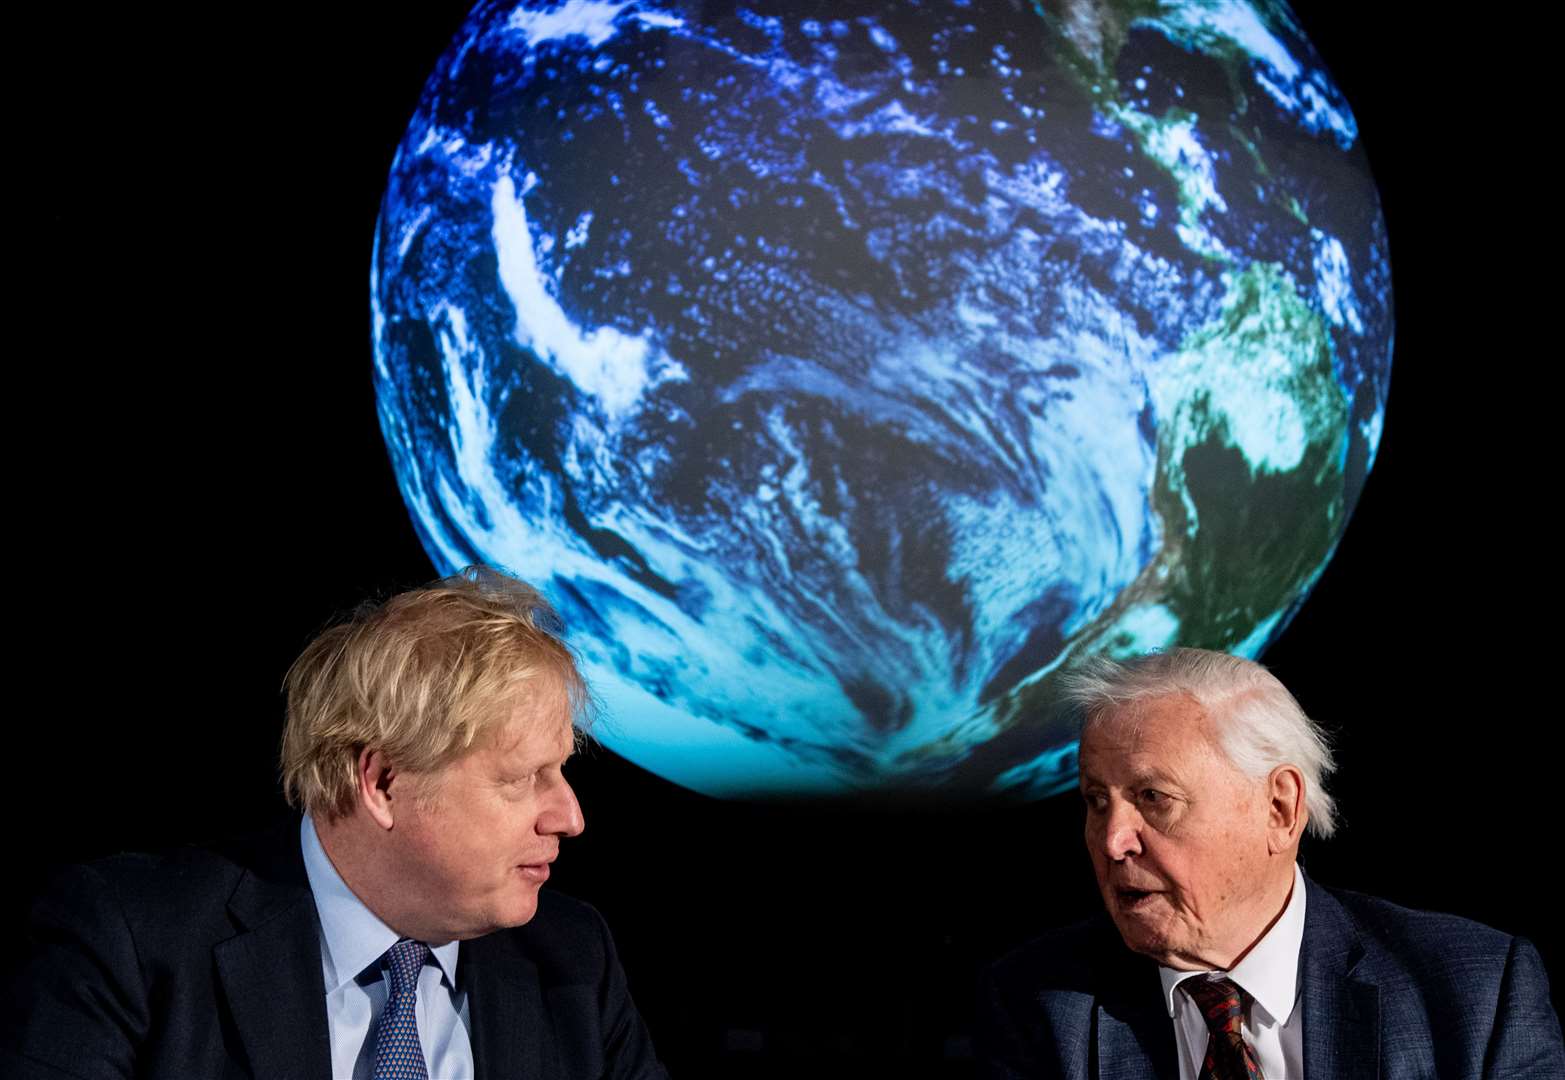 Sir David Attenborough helped to launch preparations for next year’s Cop26 UN Climate Summit (PA)